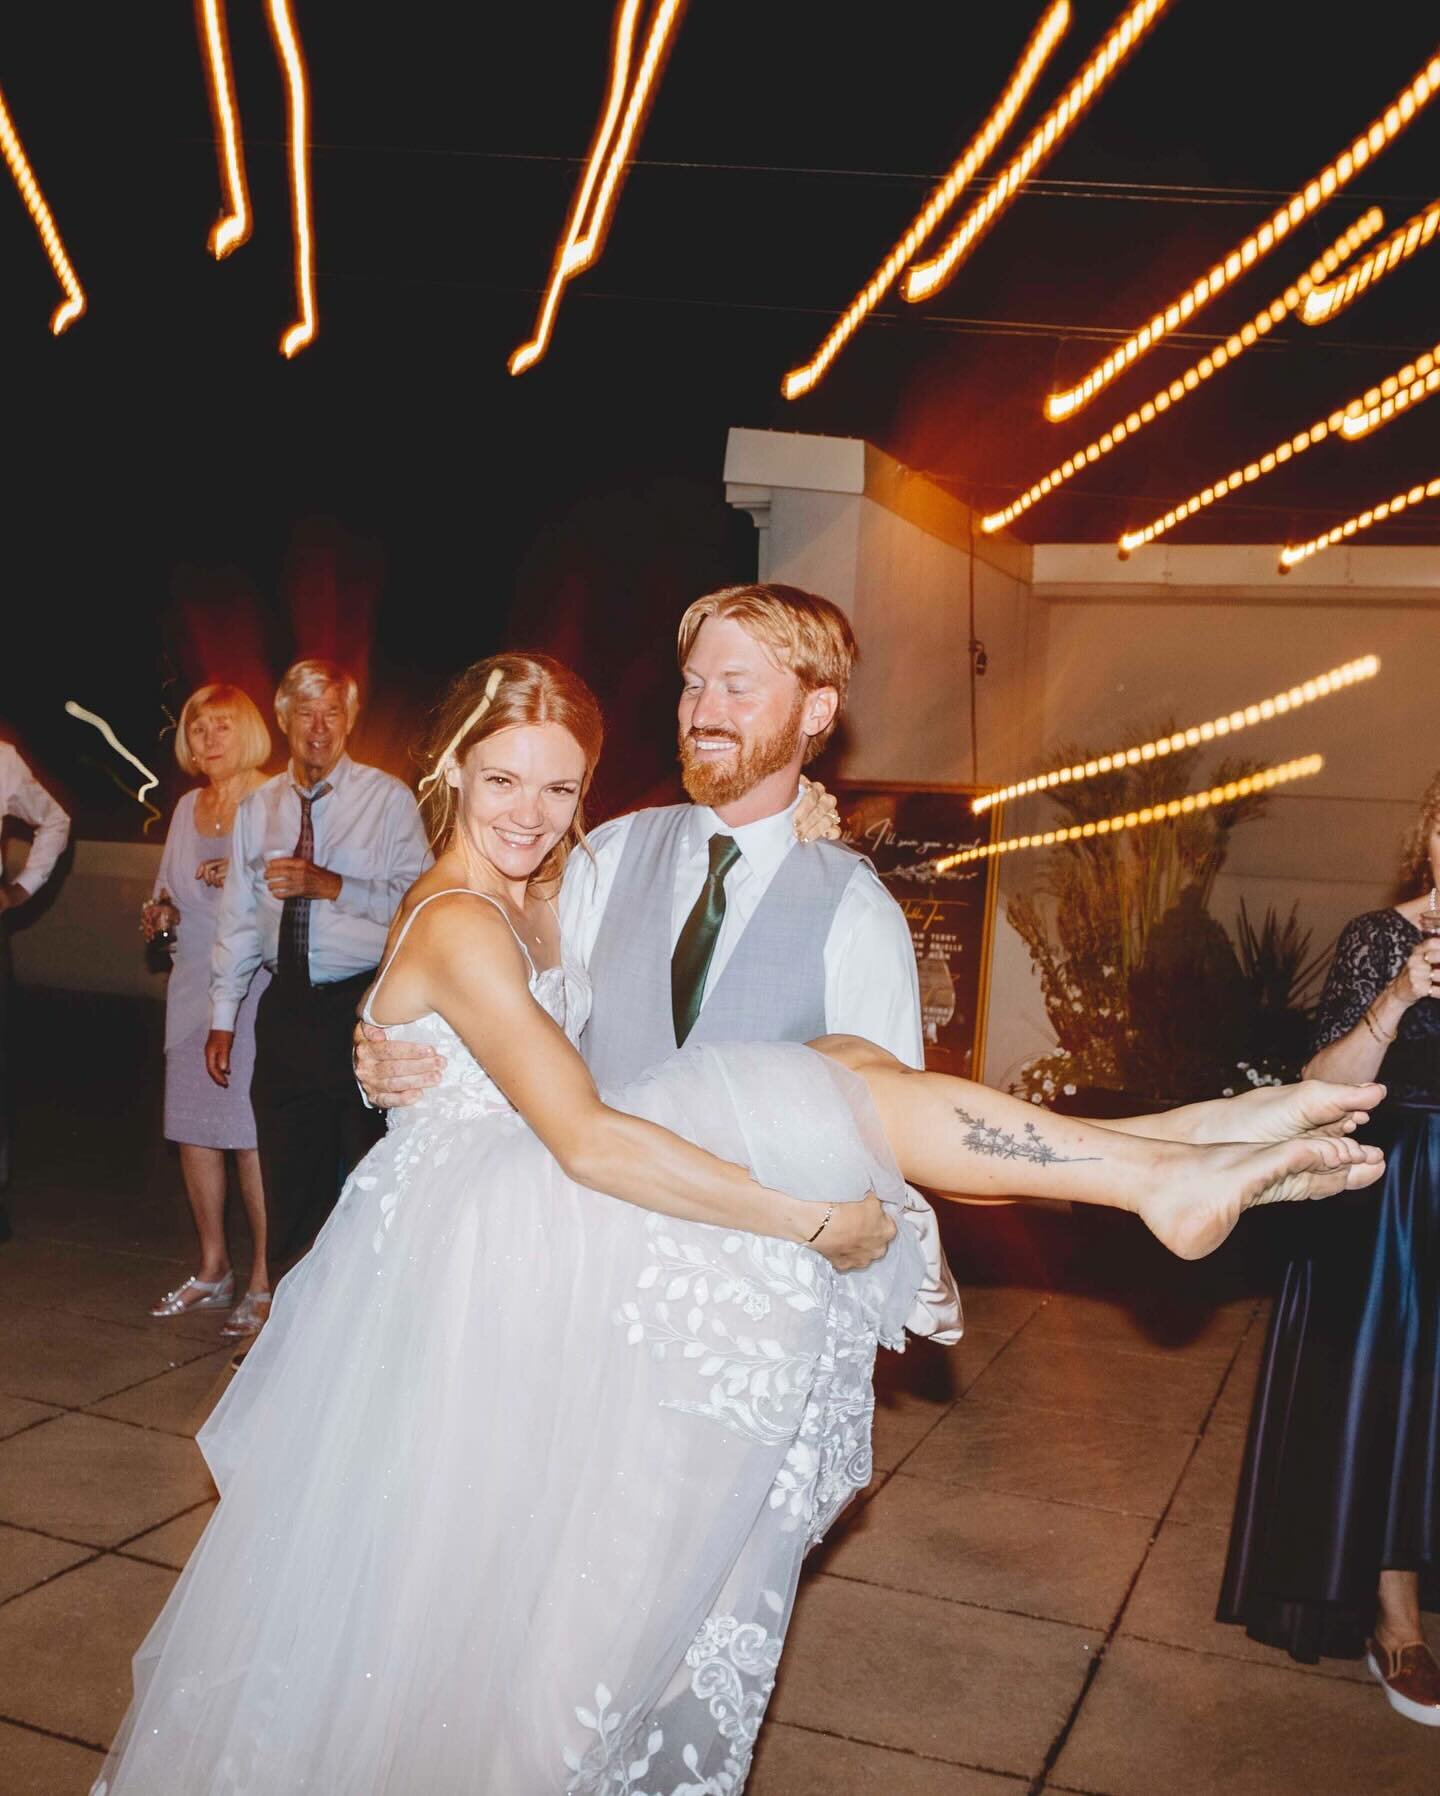 This is a rooftop dance party done right ✨👌 Getting lost in your wedding dress, jumping into the arms of your friends and cartwheels many cartwheels 🥳 🤸